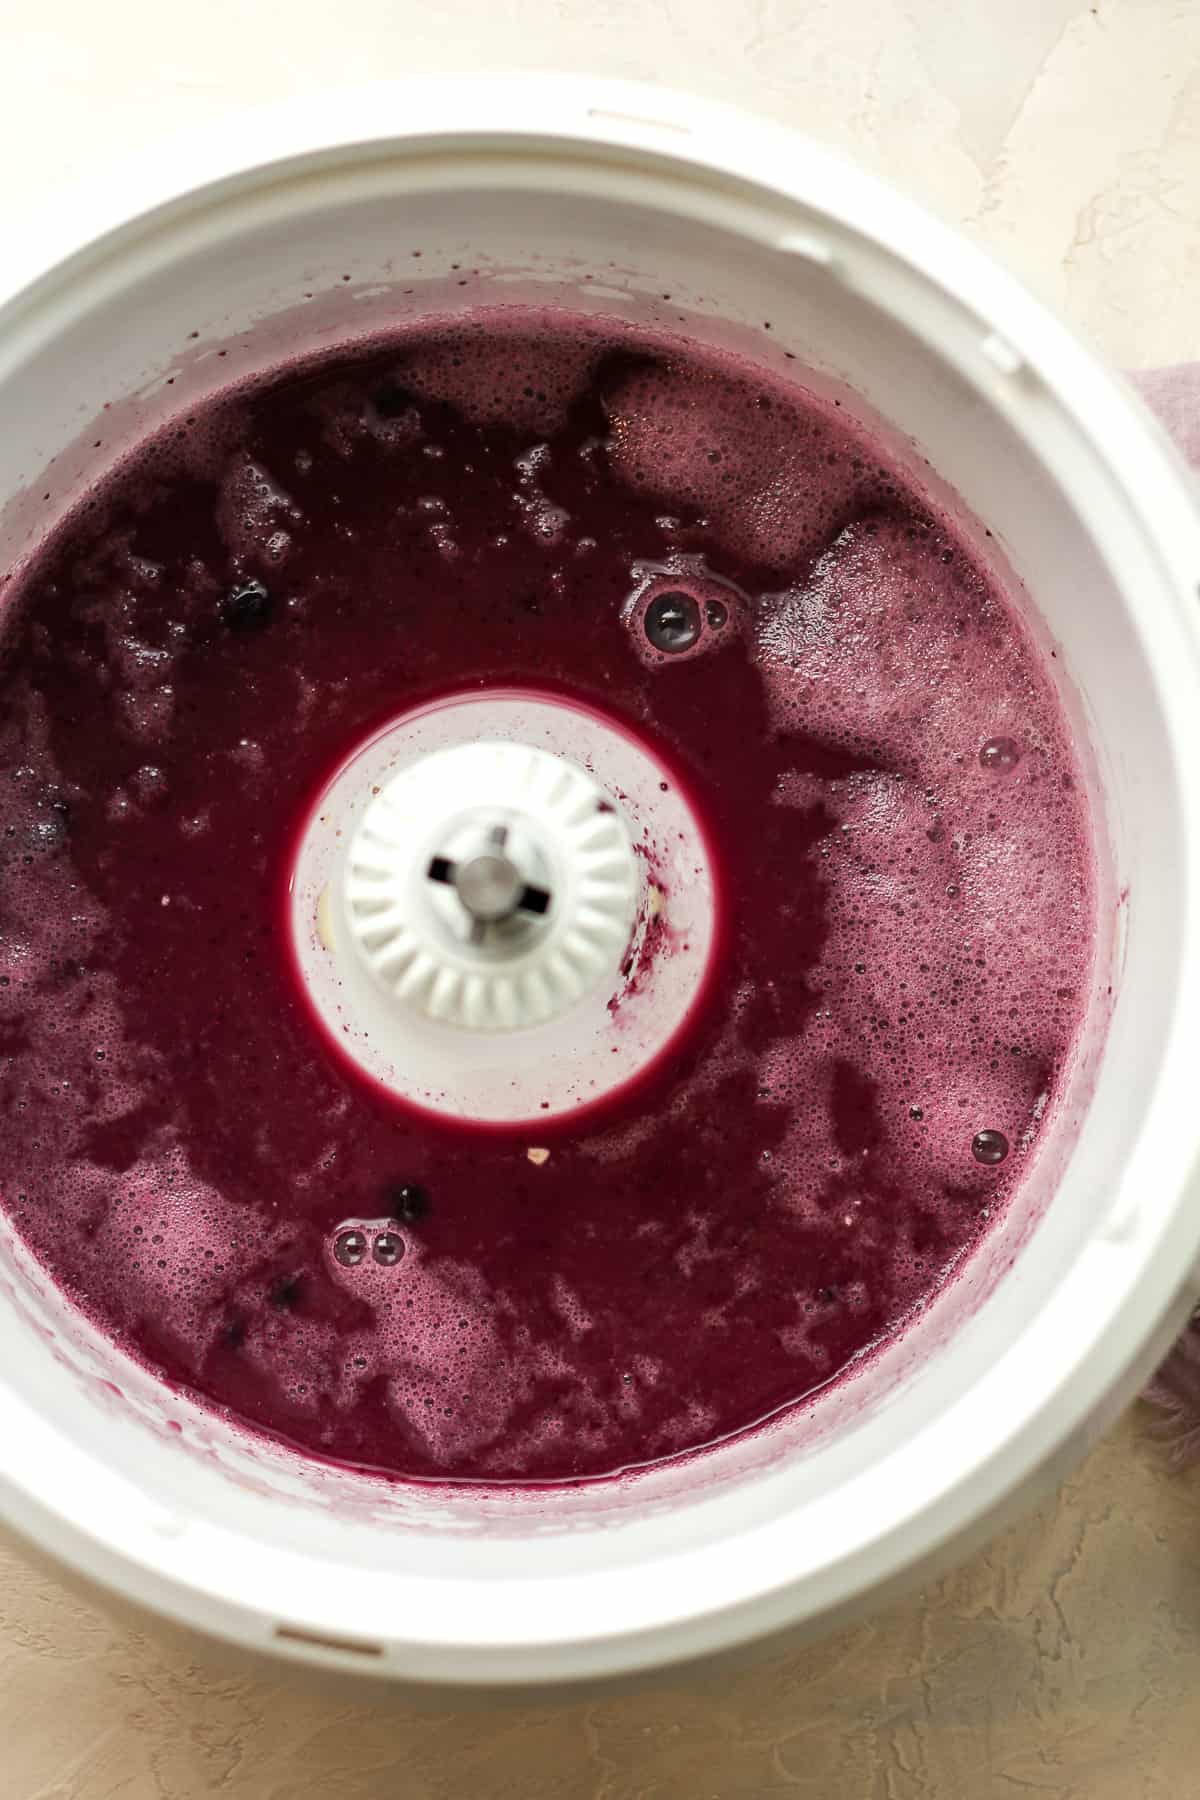 A mixer with the blueberry liquid.